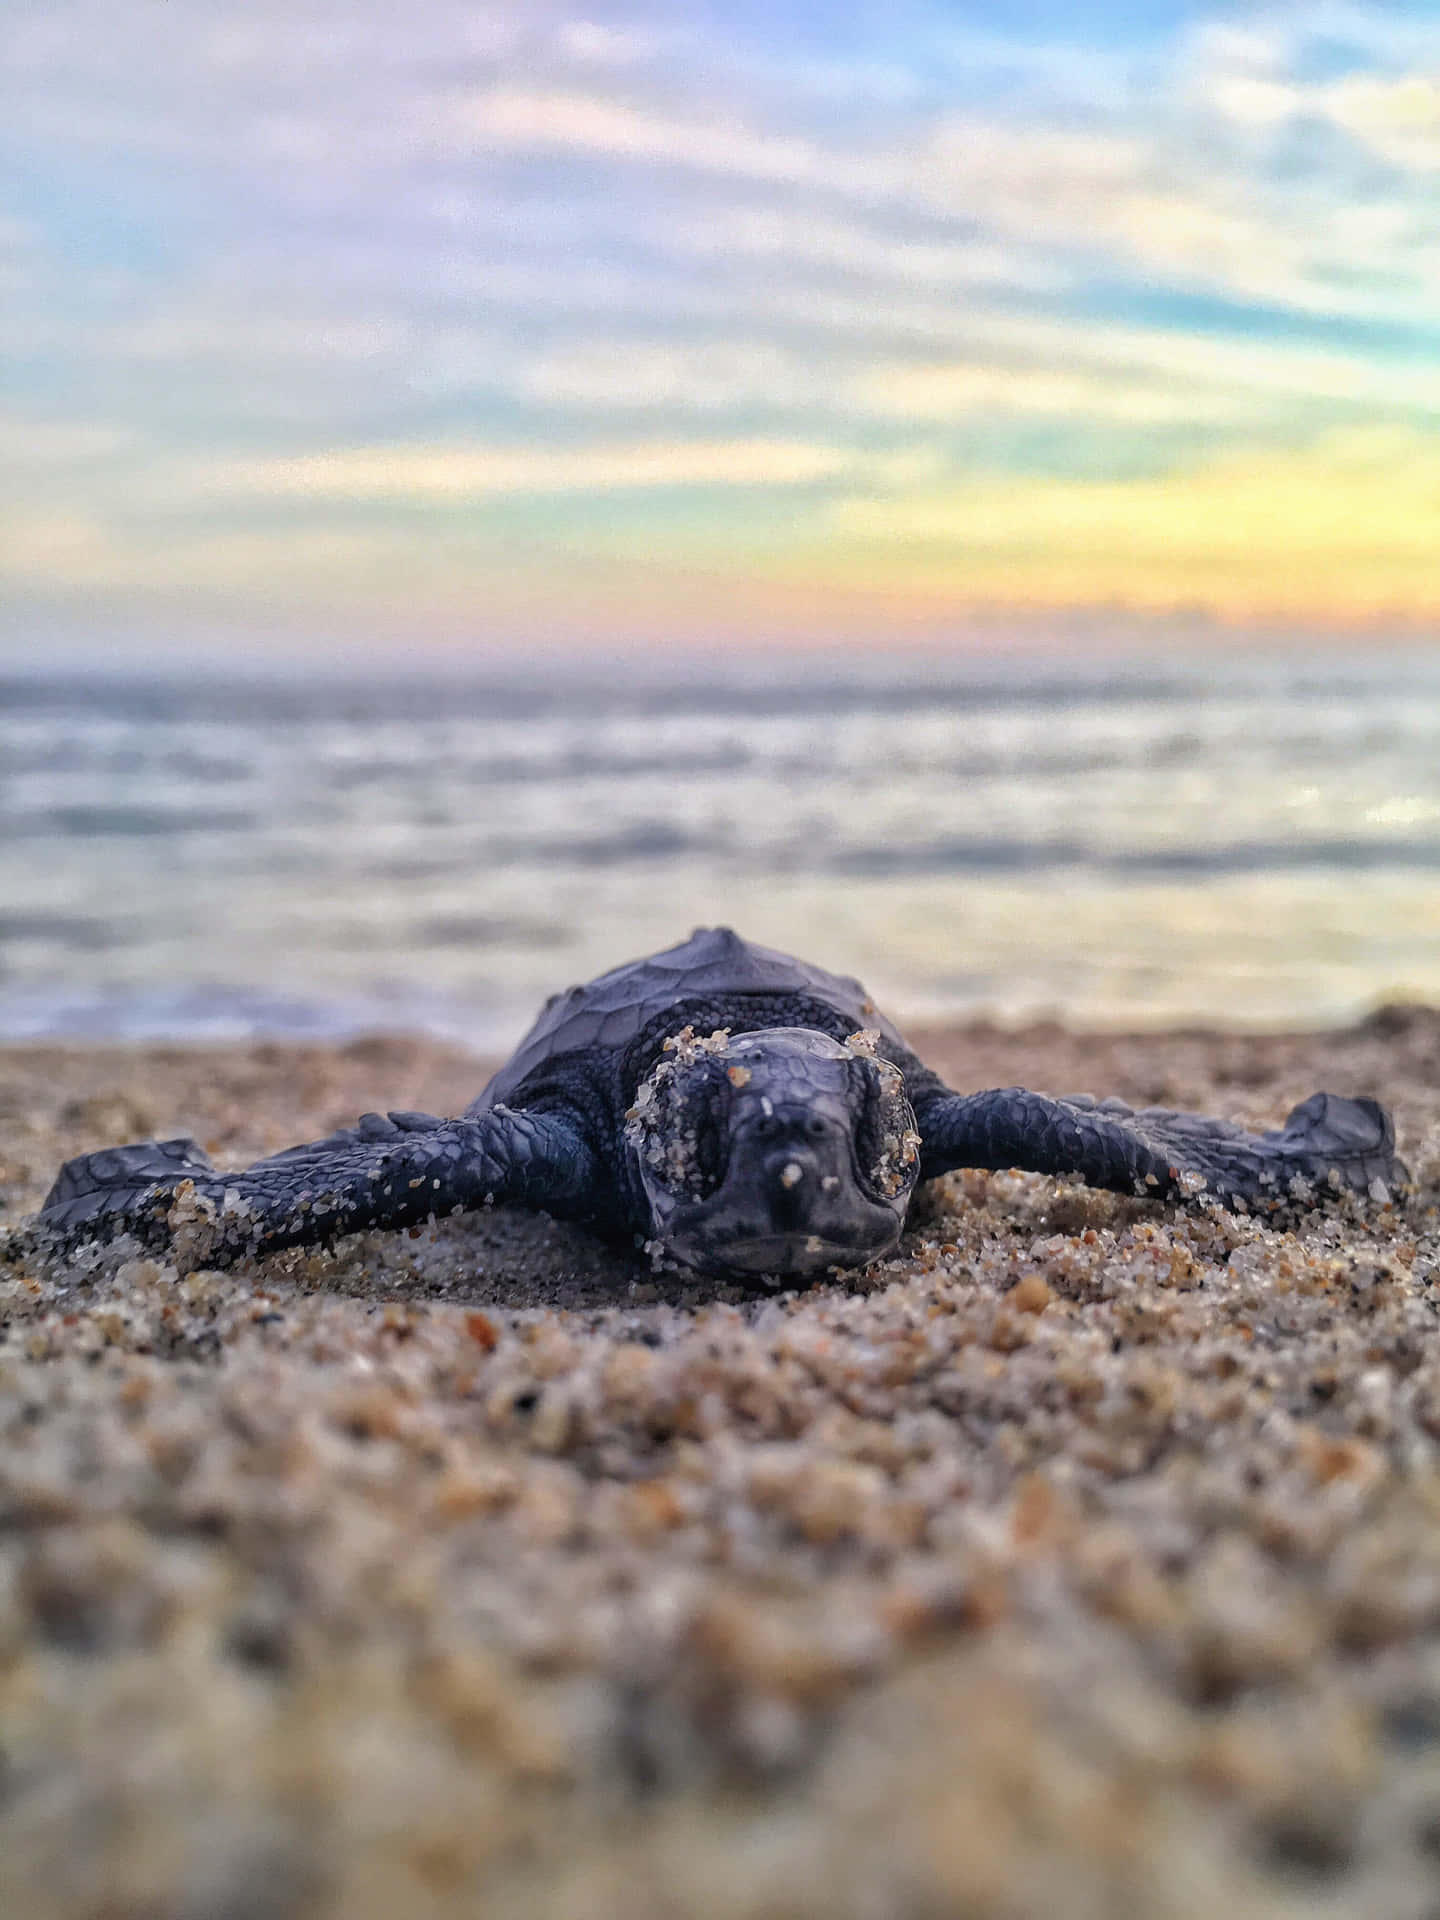 A Baby Sea Turtle Is Laying On The Beach At Sunset Wallpaper